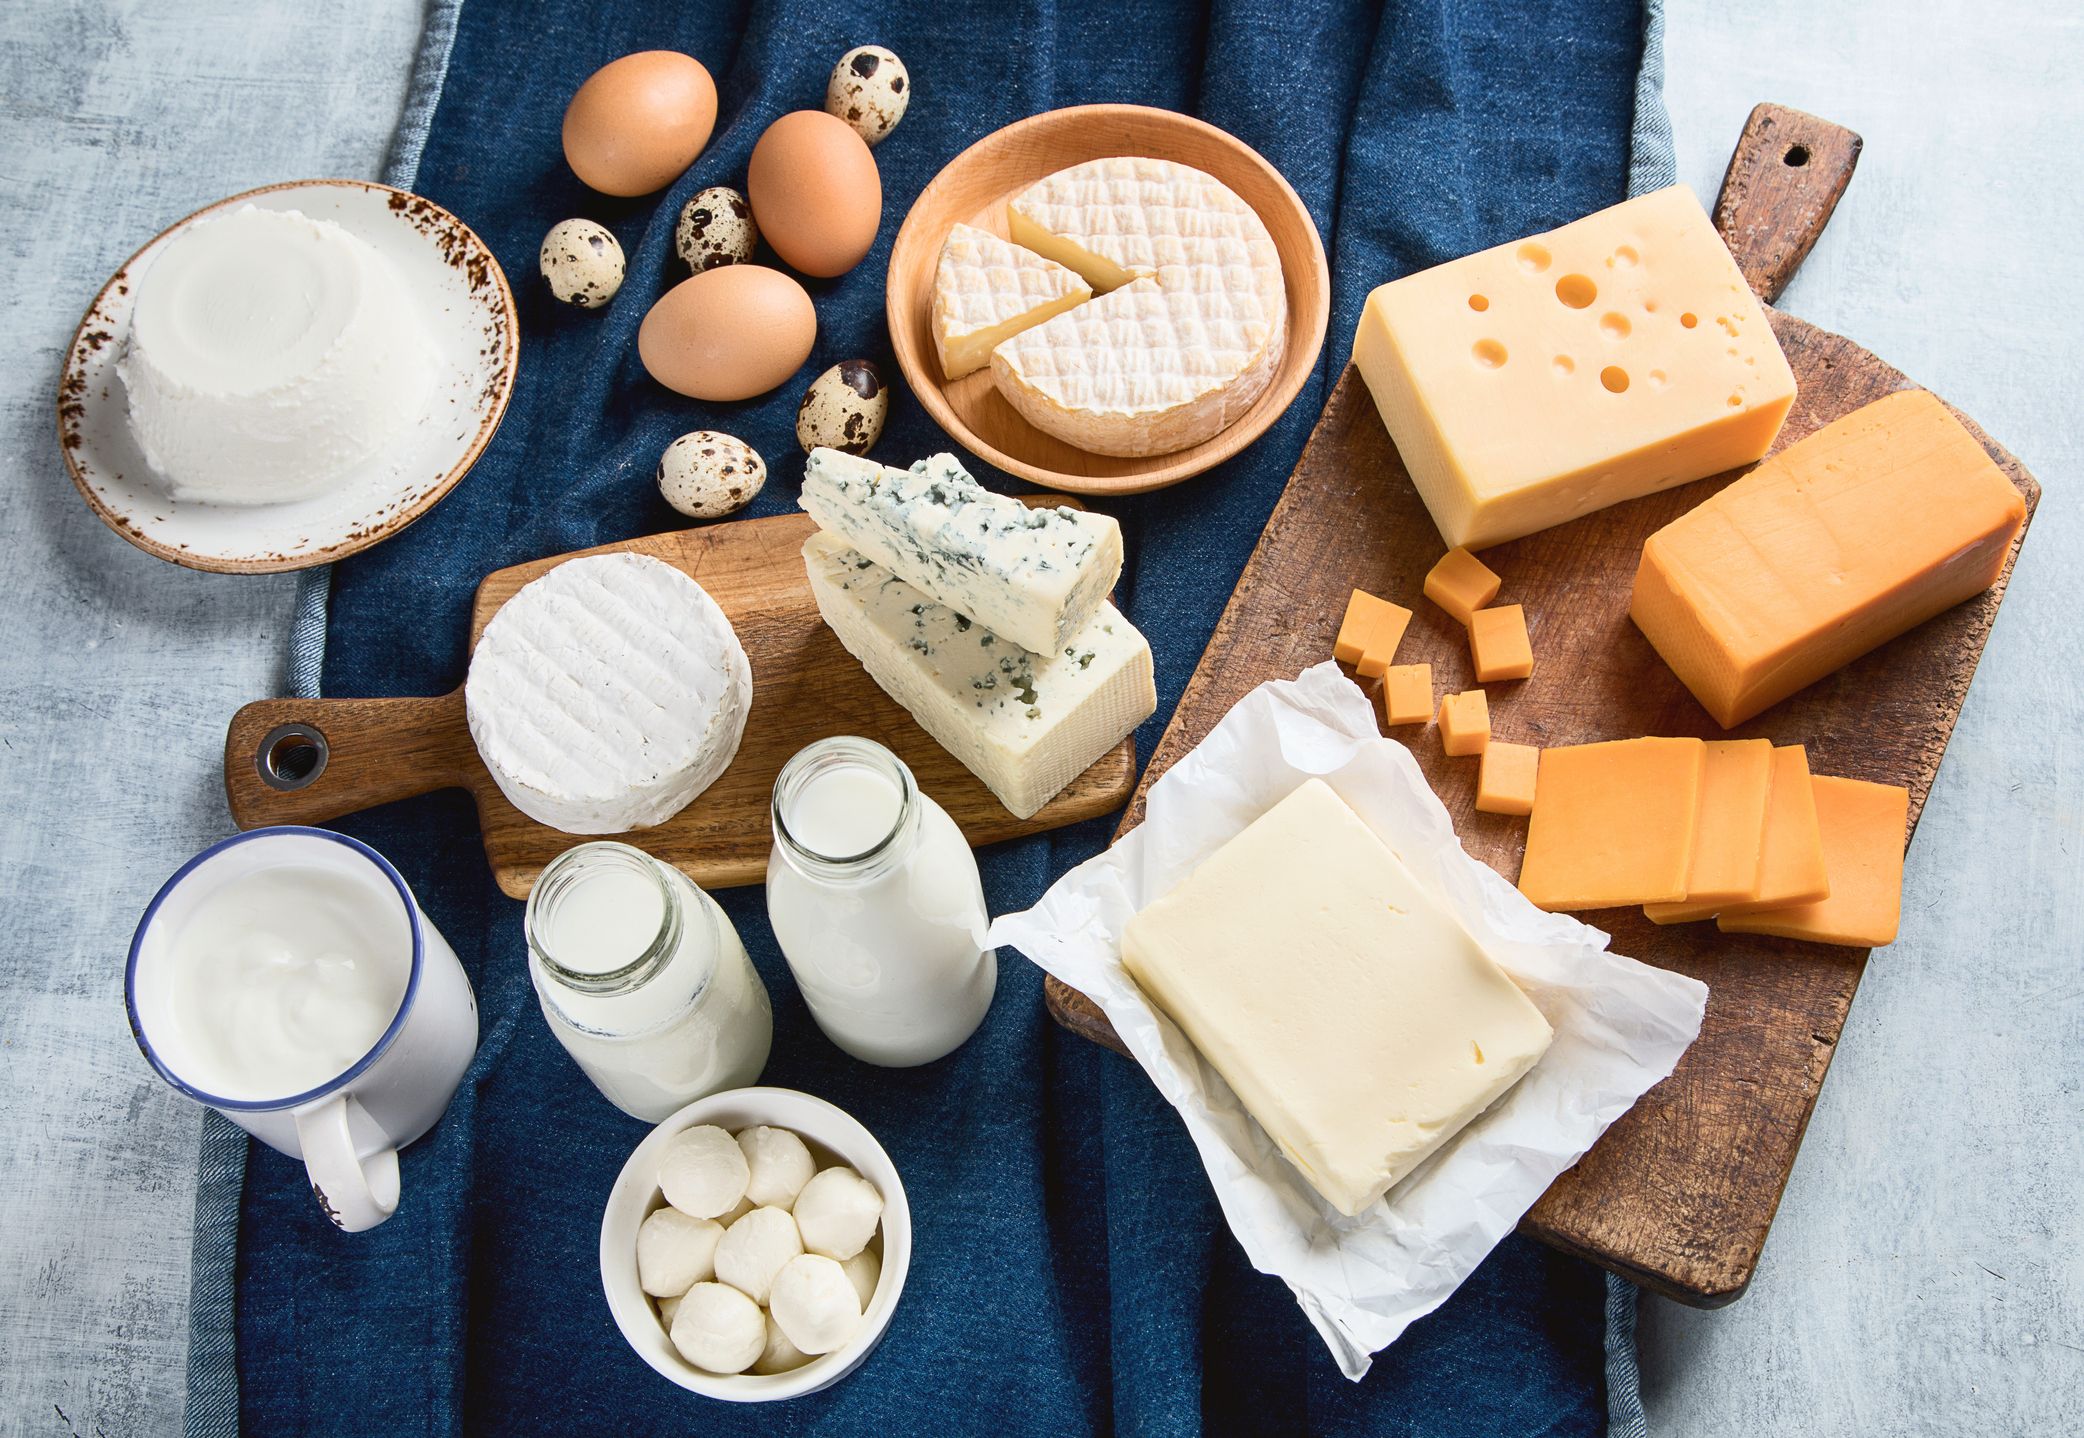 Are dairy products bad for you?